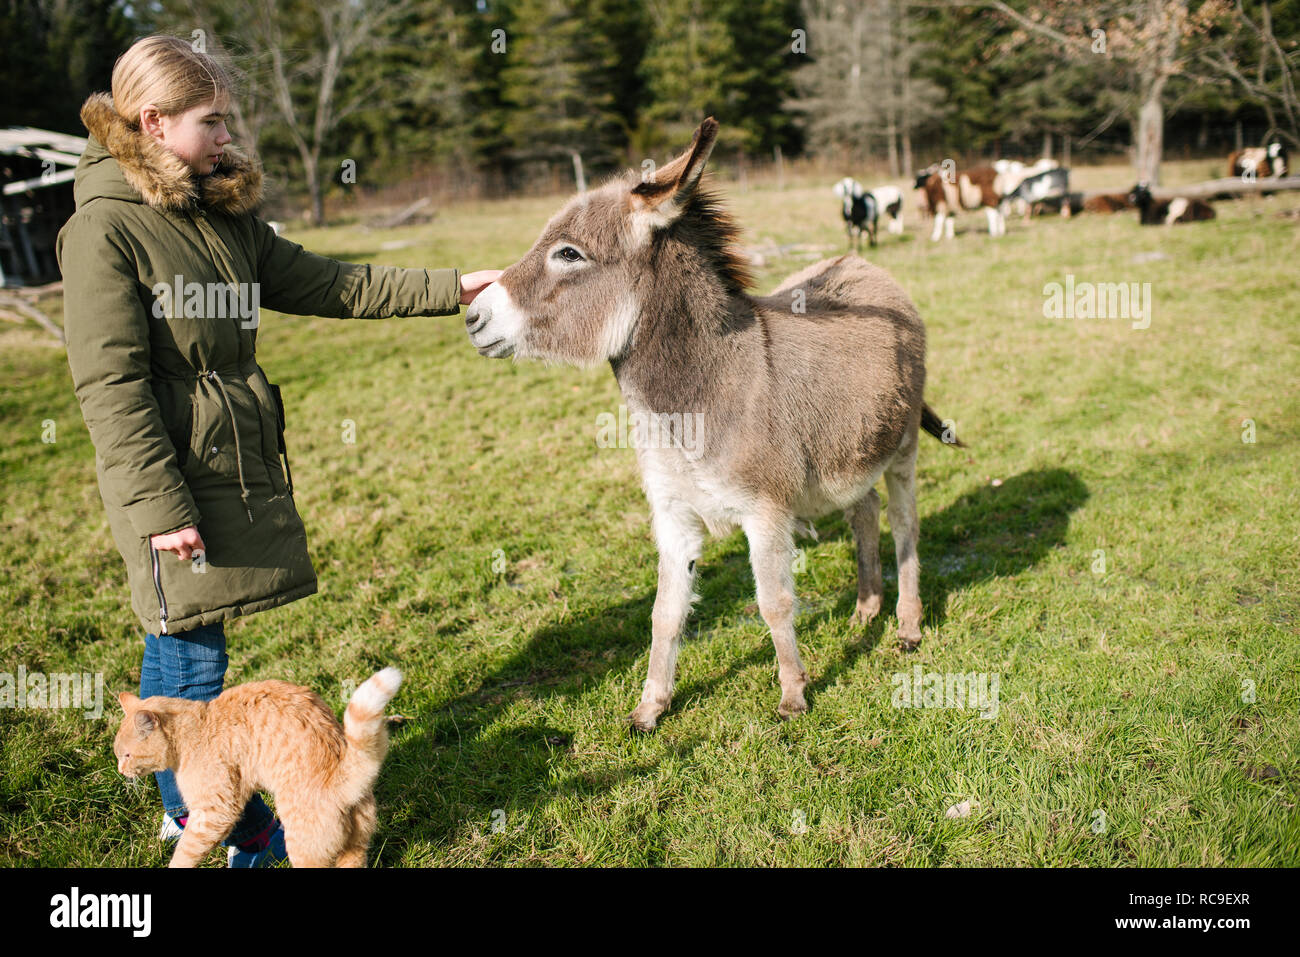 Girl stroking donkey in farm, cows in background Stock Photo